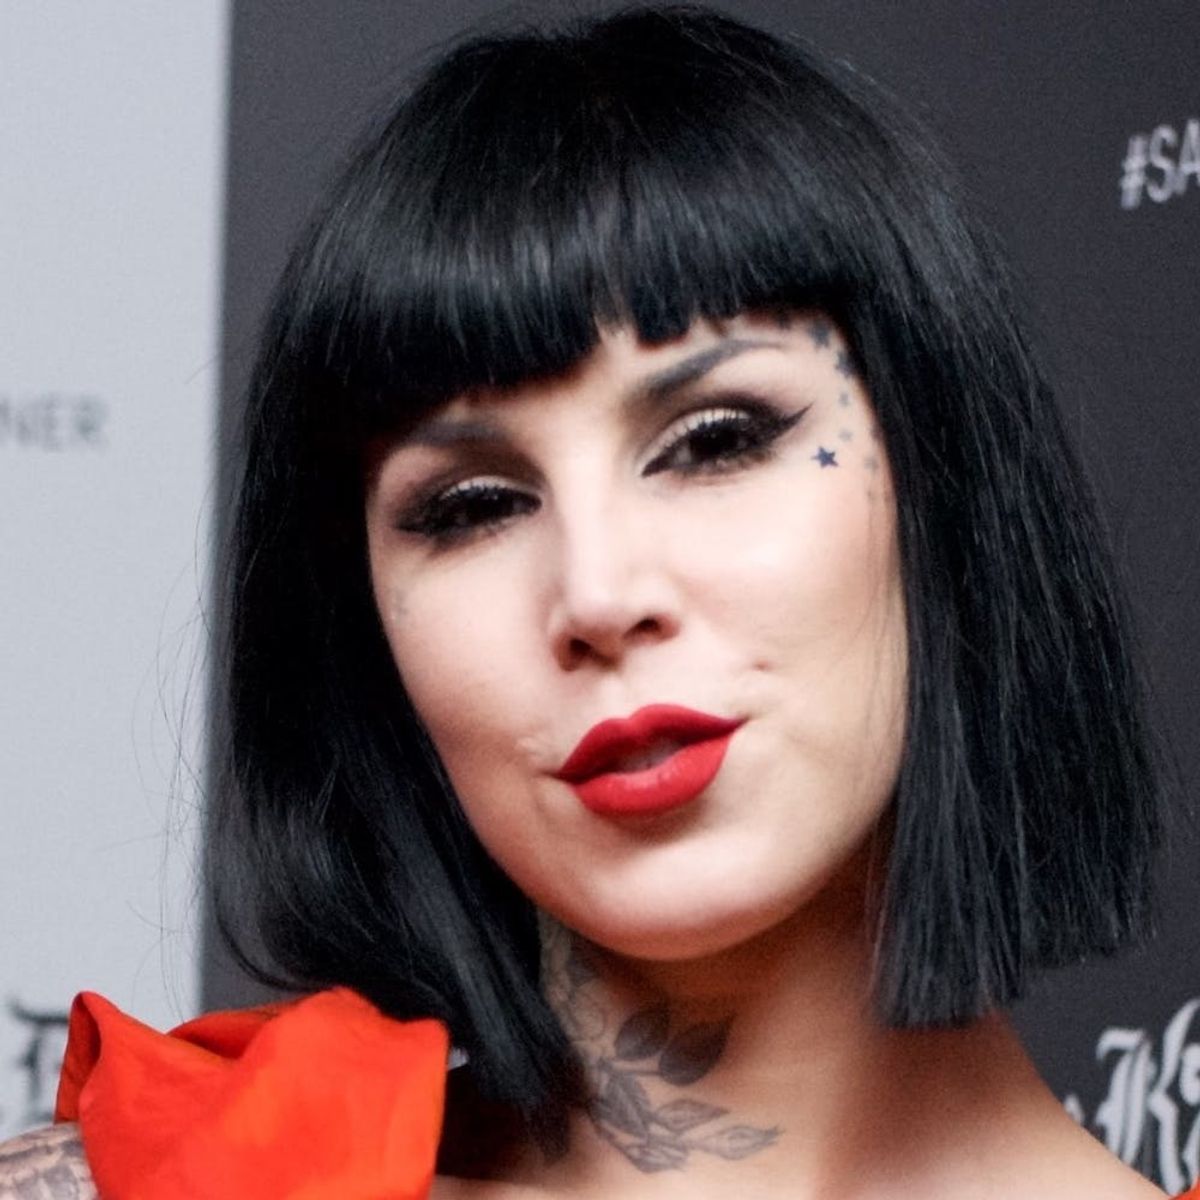 Kat Von D’s New Shoe Line Could Be Made of… Pineapples and Mushrooms?